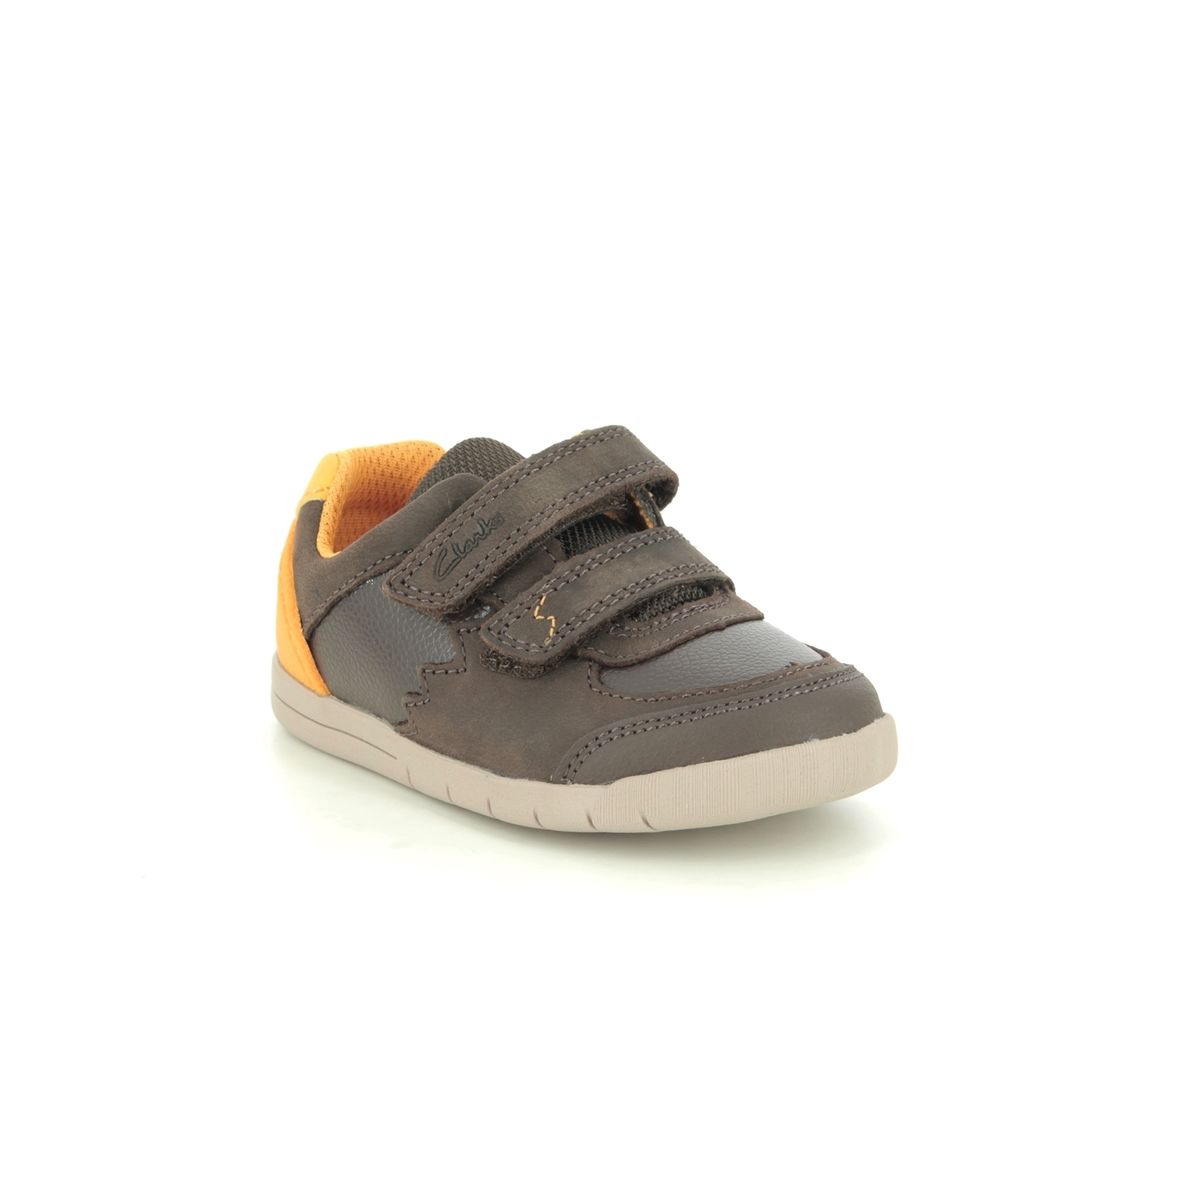 Clarks Rex Quest T Brown Leather Kids Boys Toddler Shoes 567756F In Size 7 In Plain Brown Leather F Width Fitting Regular Fit For kids